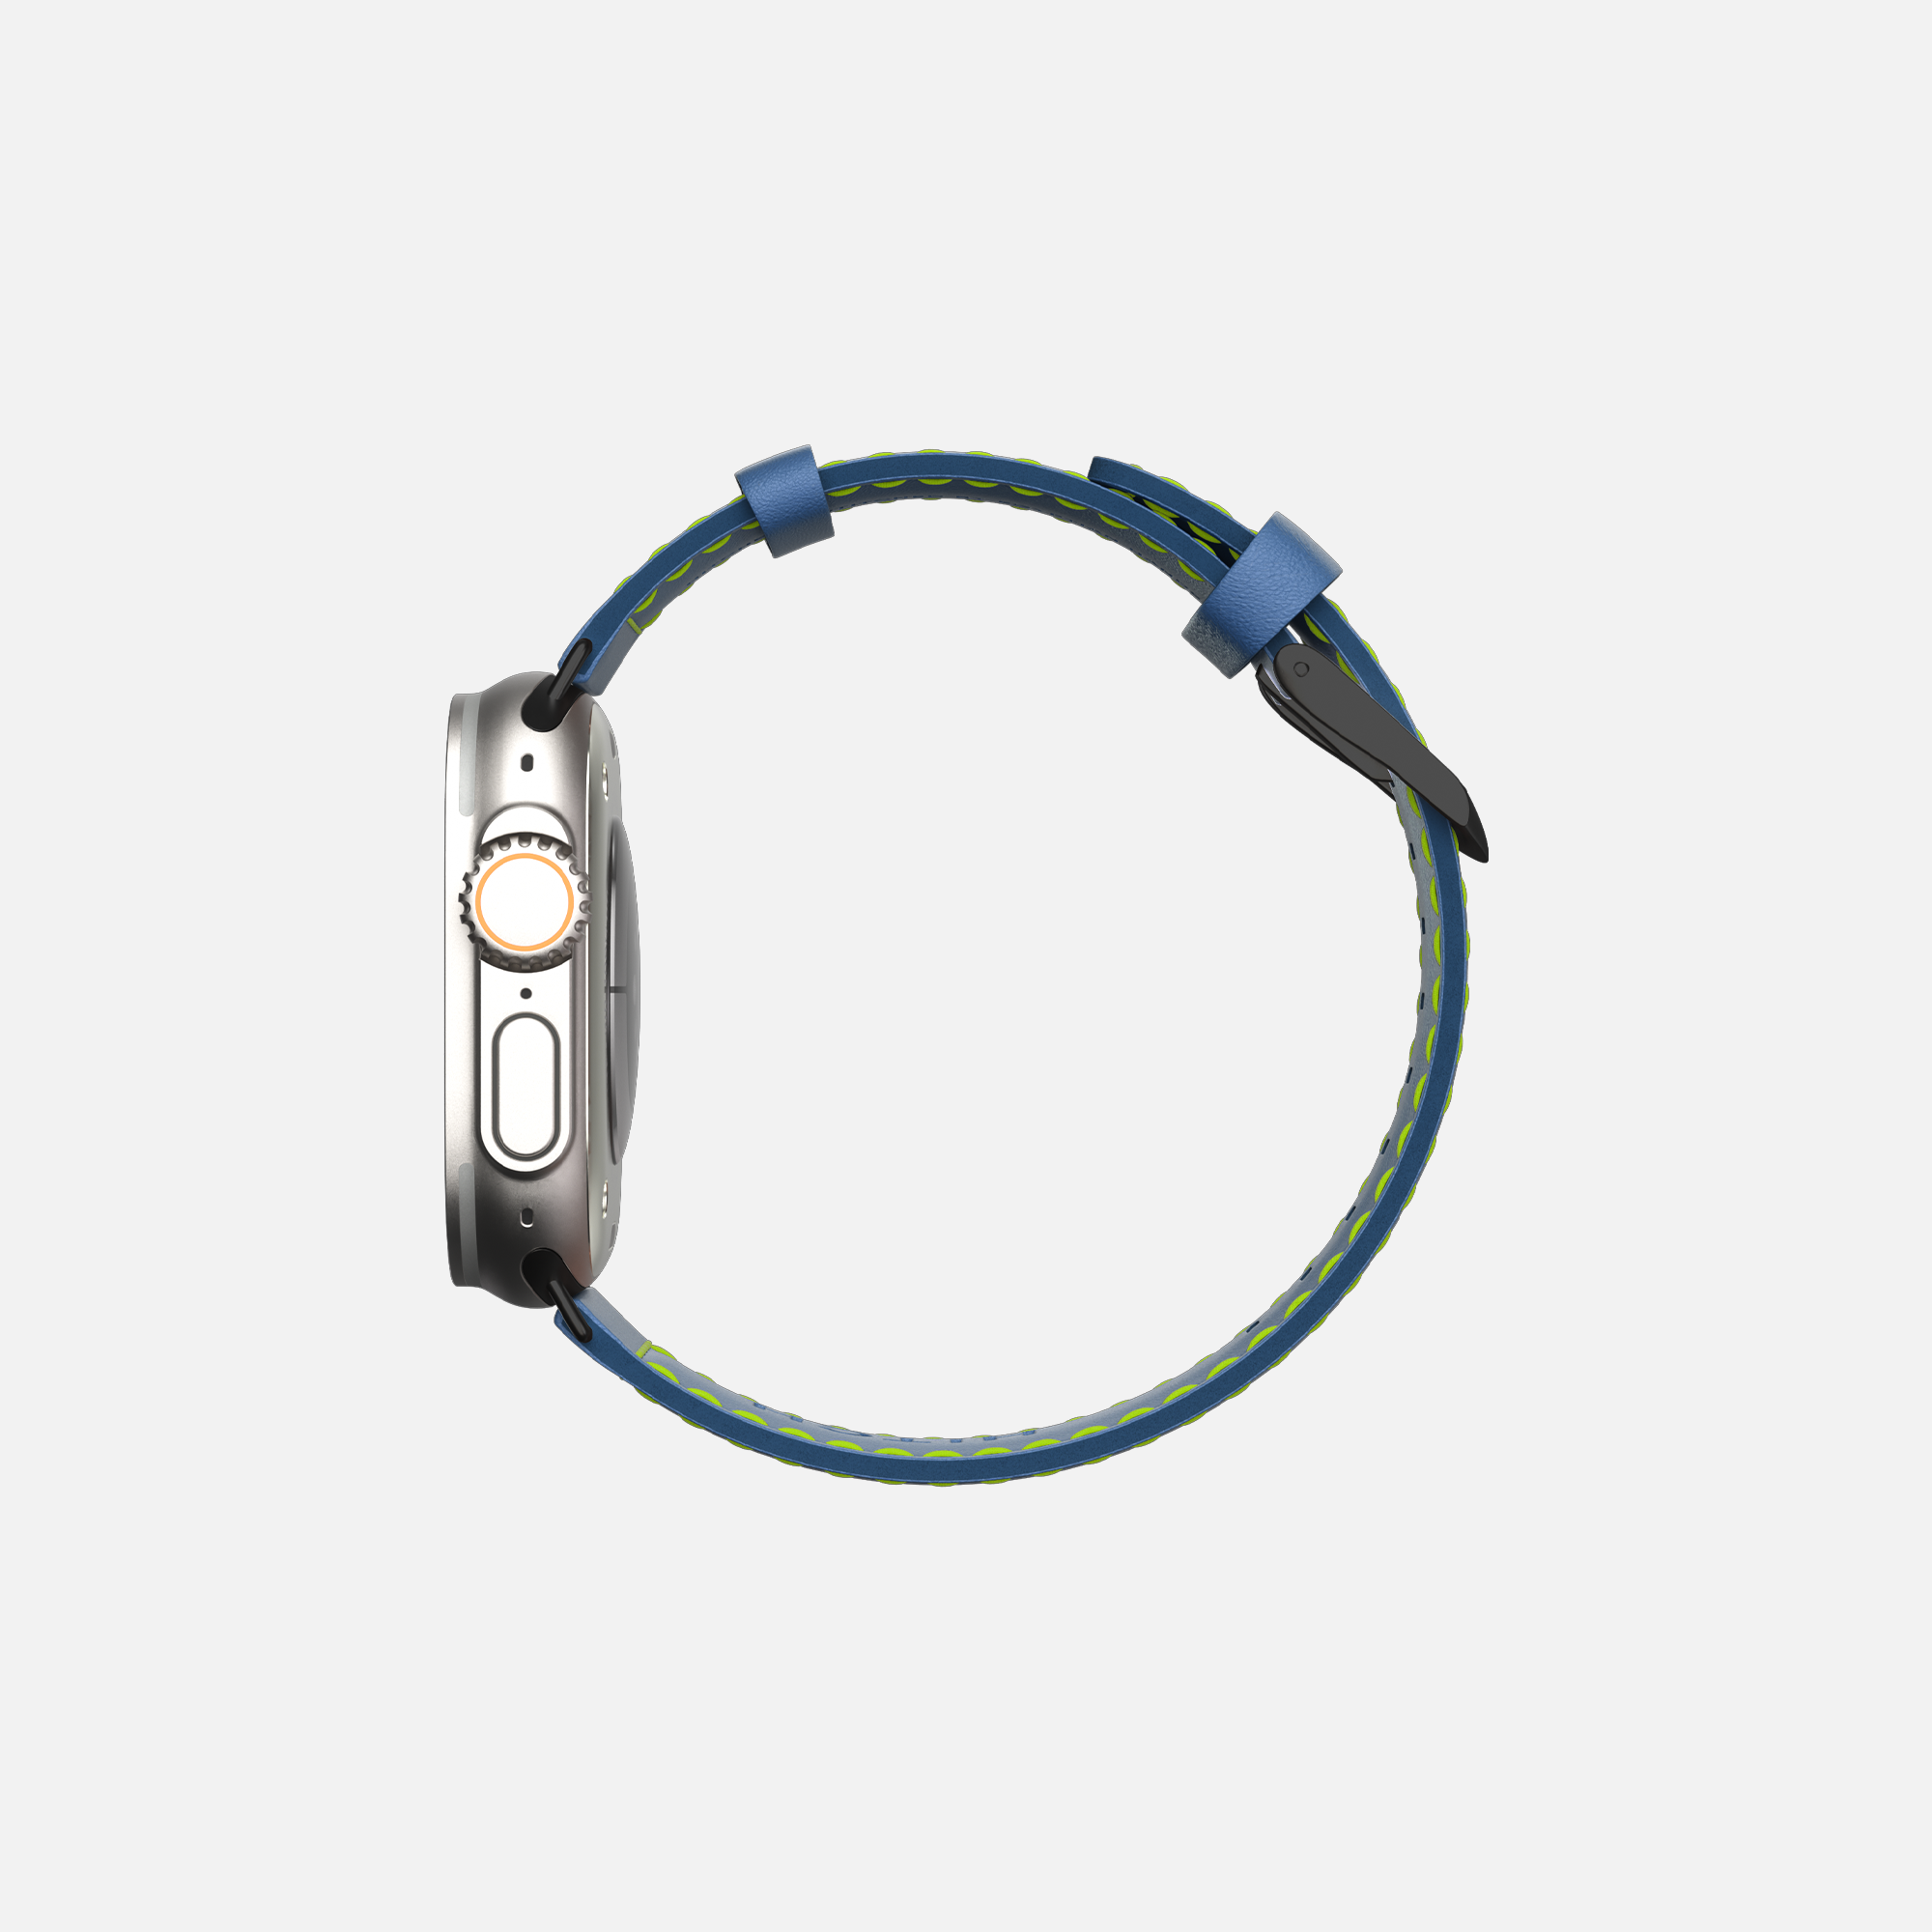 Side view of an Apple Smartwatch with blue leather strap and green stitching on a white background.